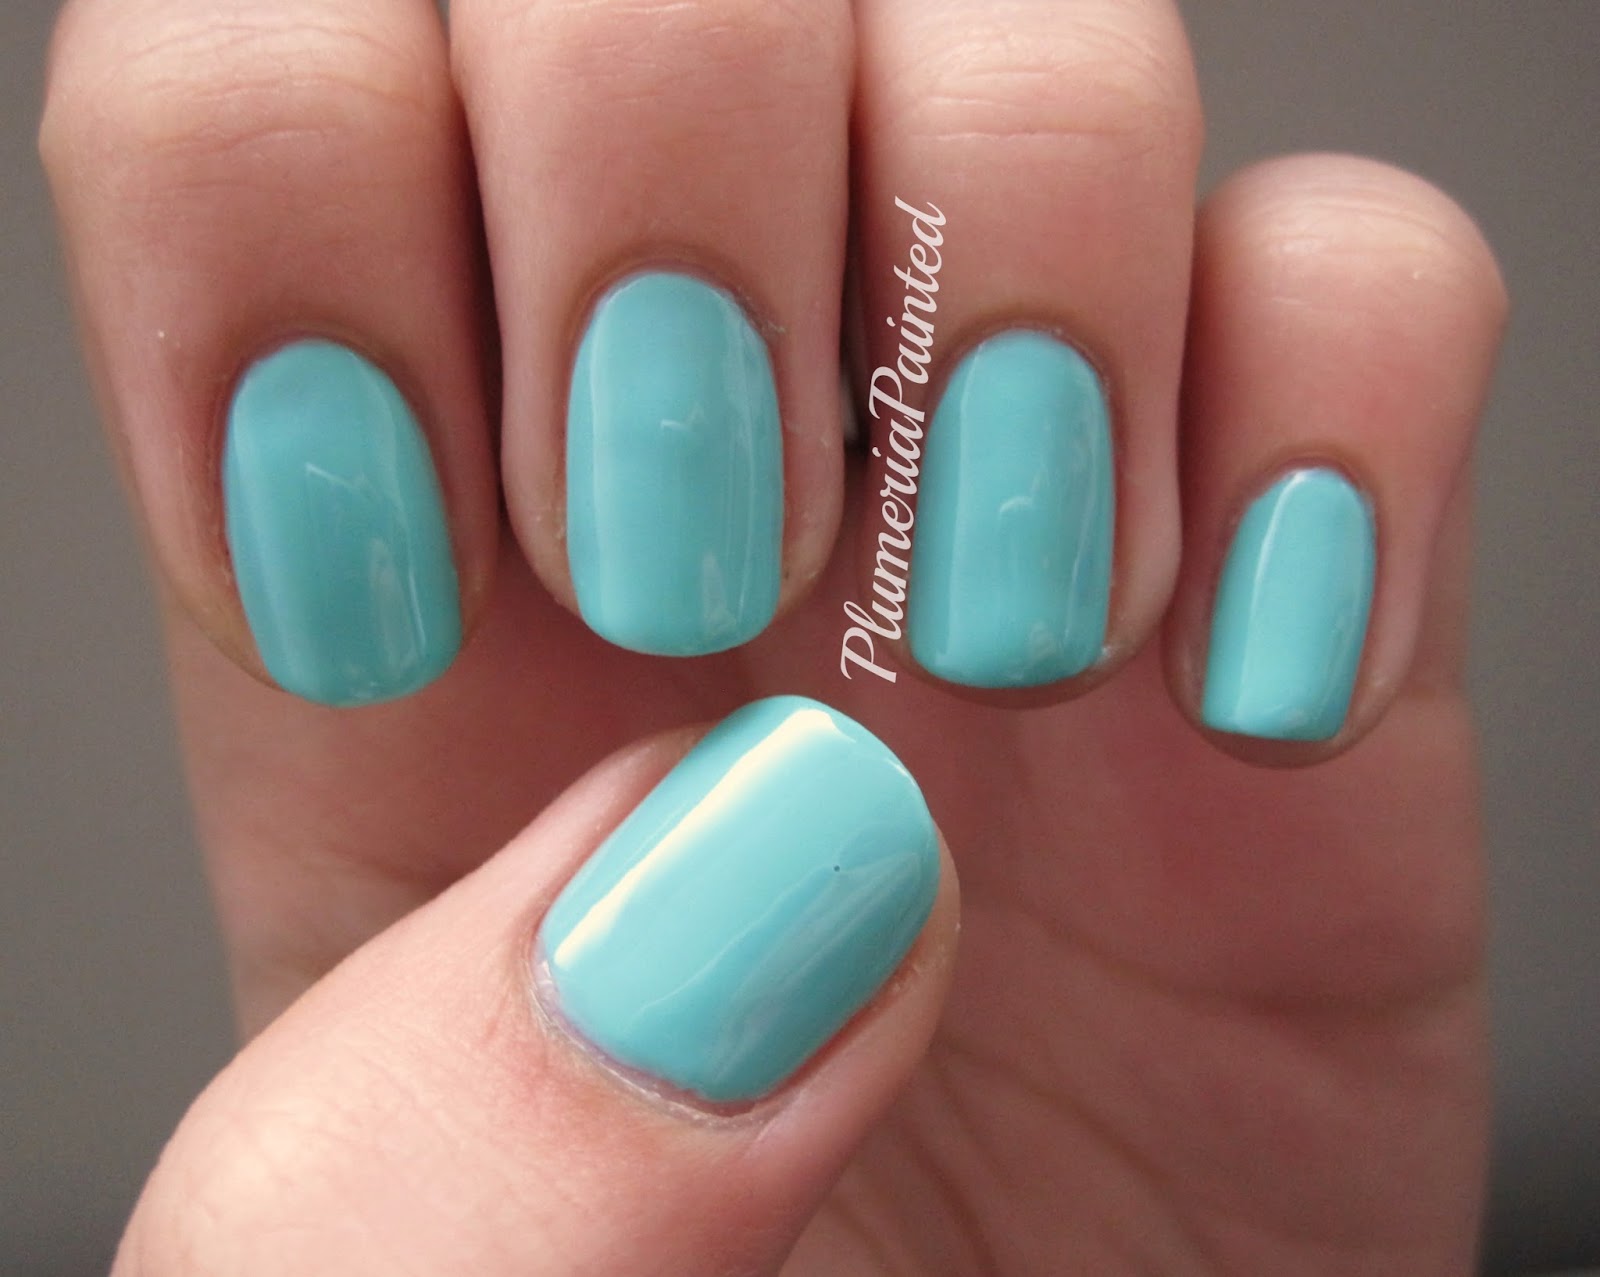 2. The Face Shop Trendy Nails Basic Nail Polish in "Mint Green" - wide 3